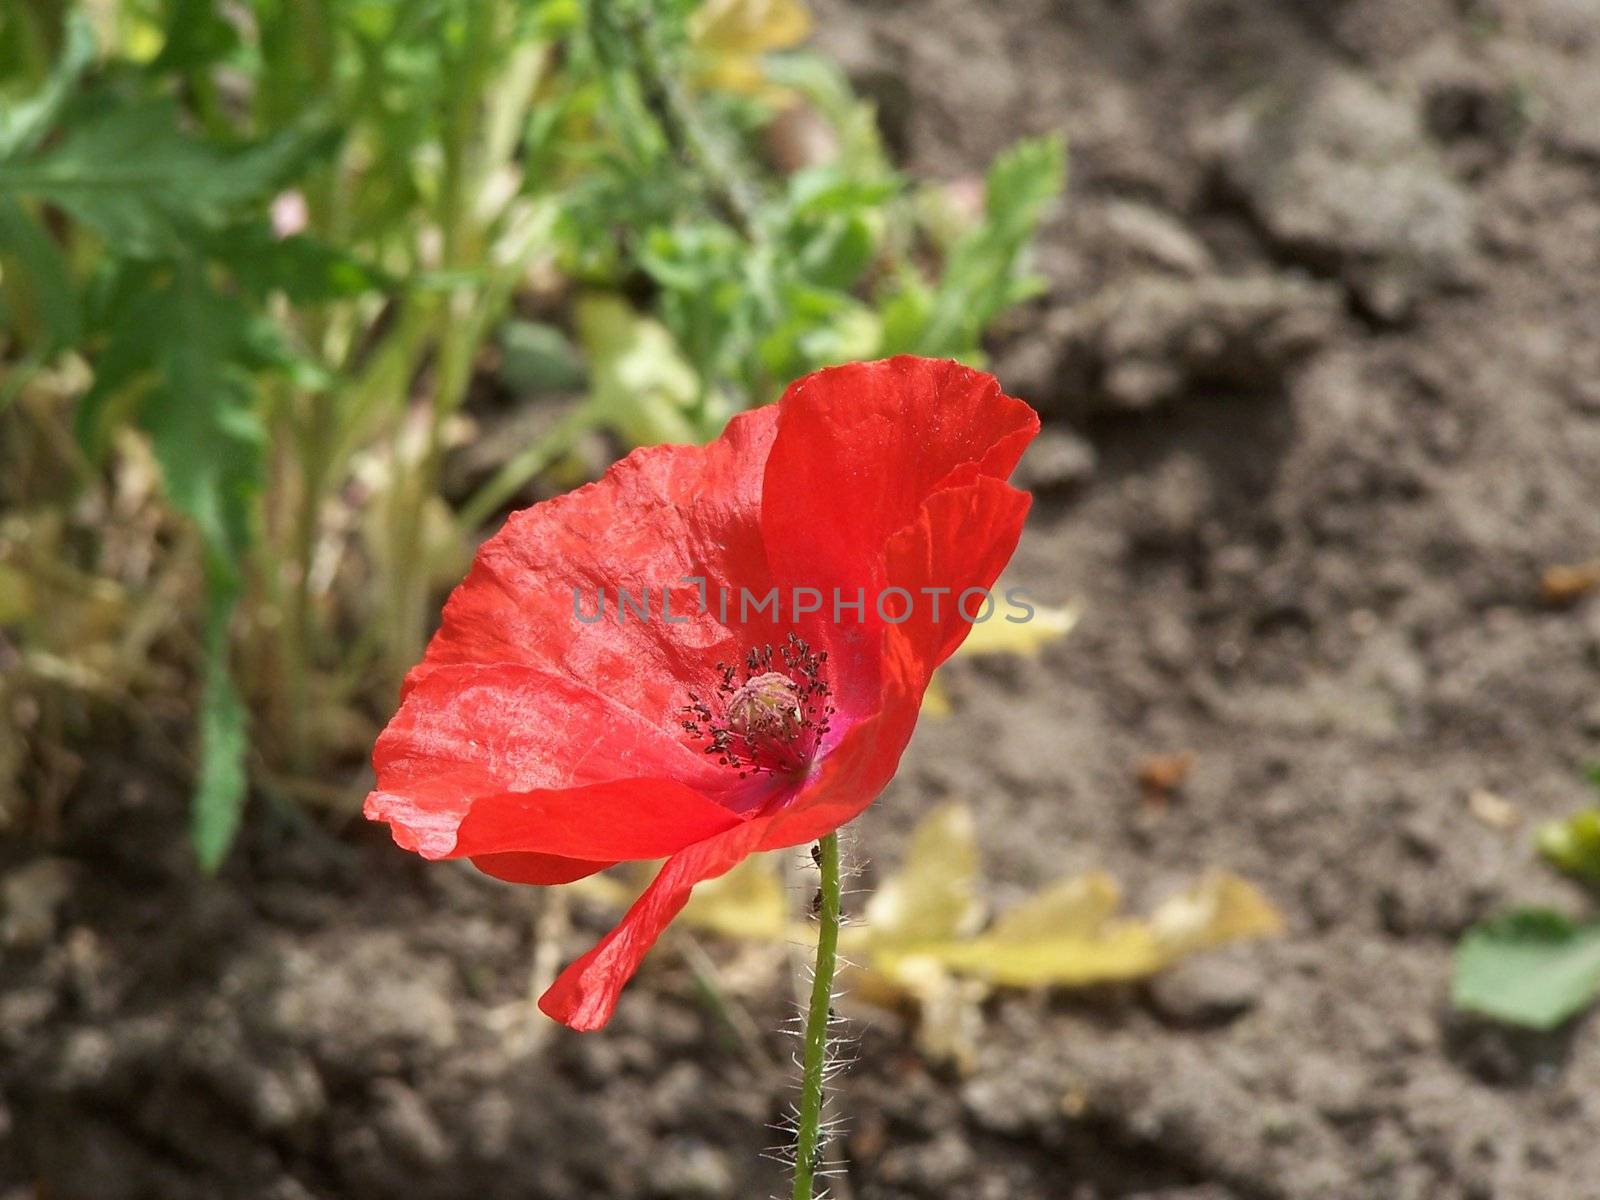 Close up of the red poppy blossom.